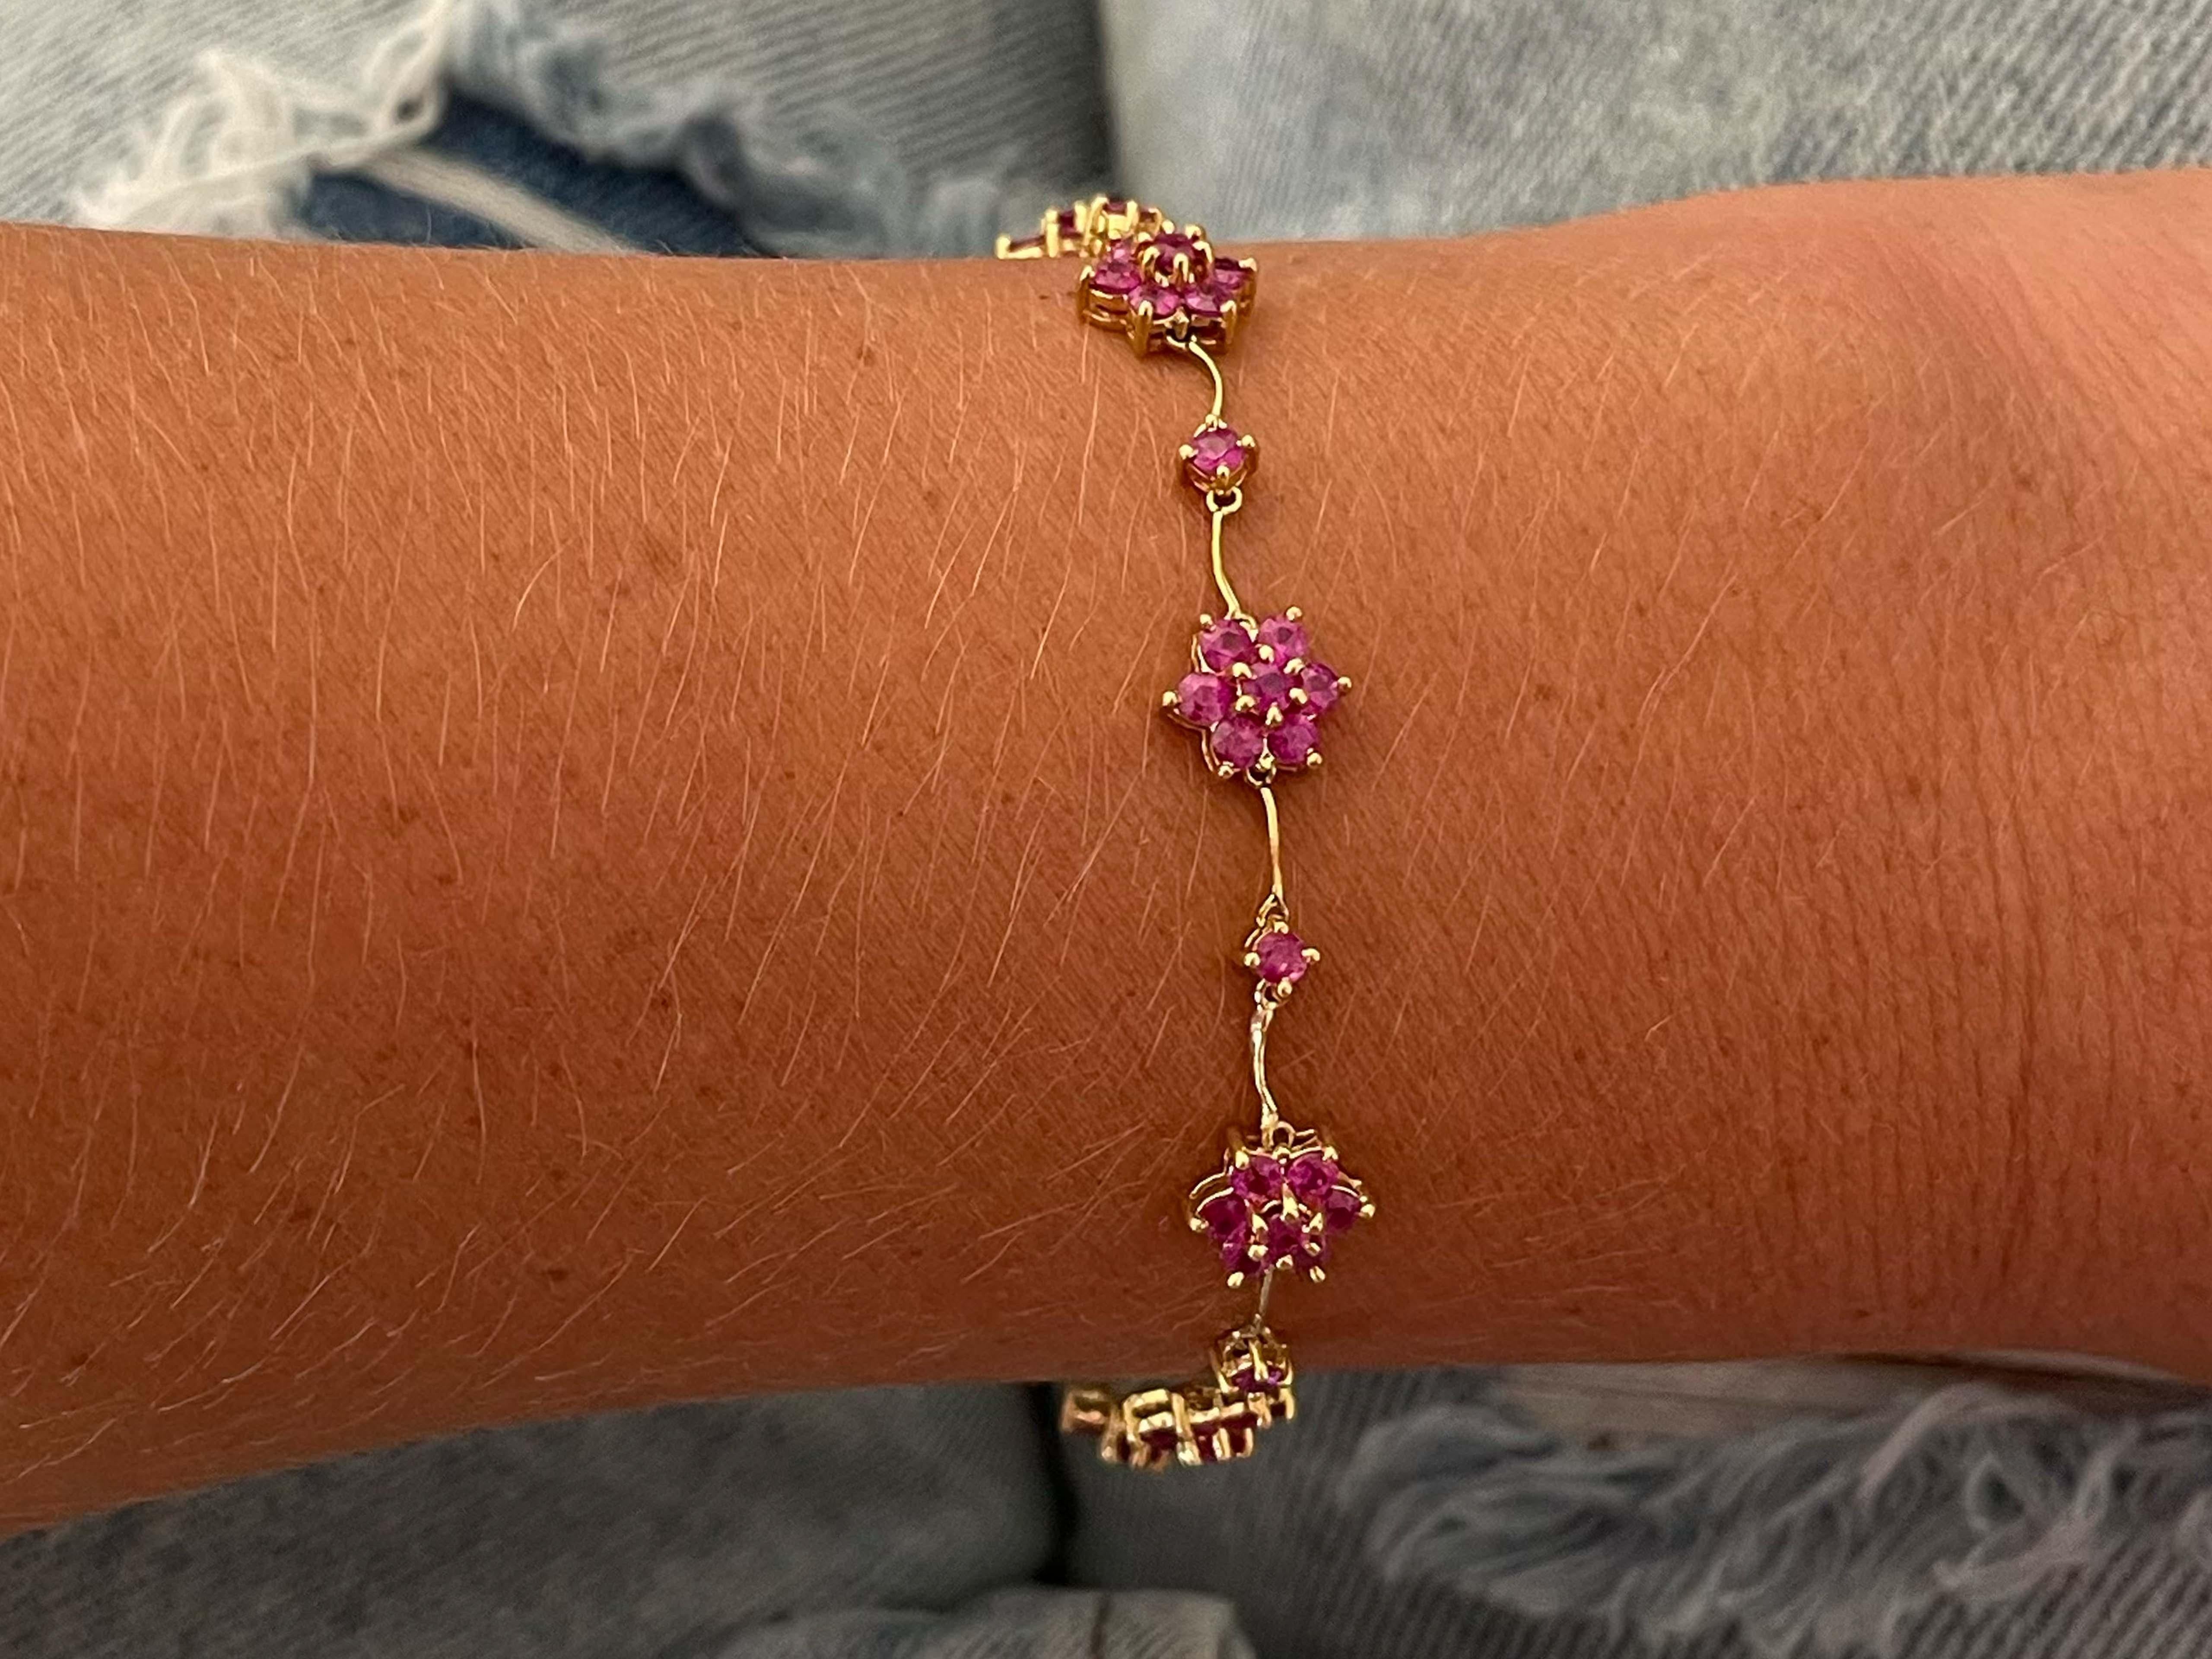 Bracelet Specifications:

Metal: 18k Yellow Gold

Gemstone: 55 red rubies

Ruby Carat Weight:  2.75 carats

Bracelet Length: ~6.5 inches

Bracelet Width: ~ 7.7 mm

Total Weight: 7.4 Grams

Condition: Vintage, Excellent

Stamped: 